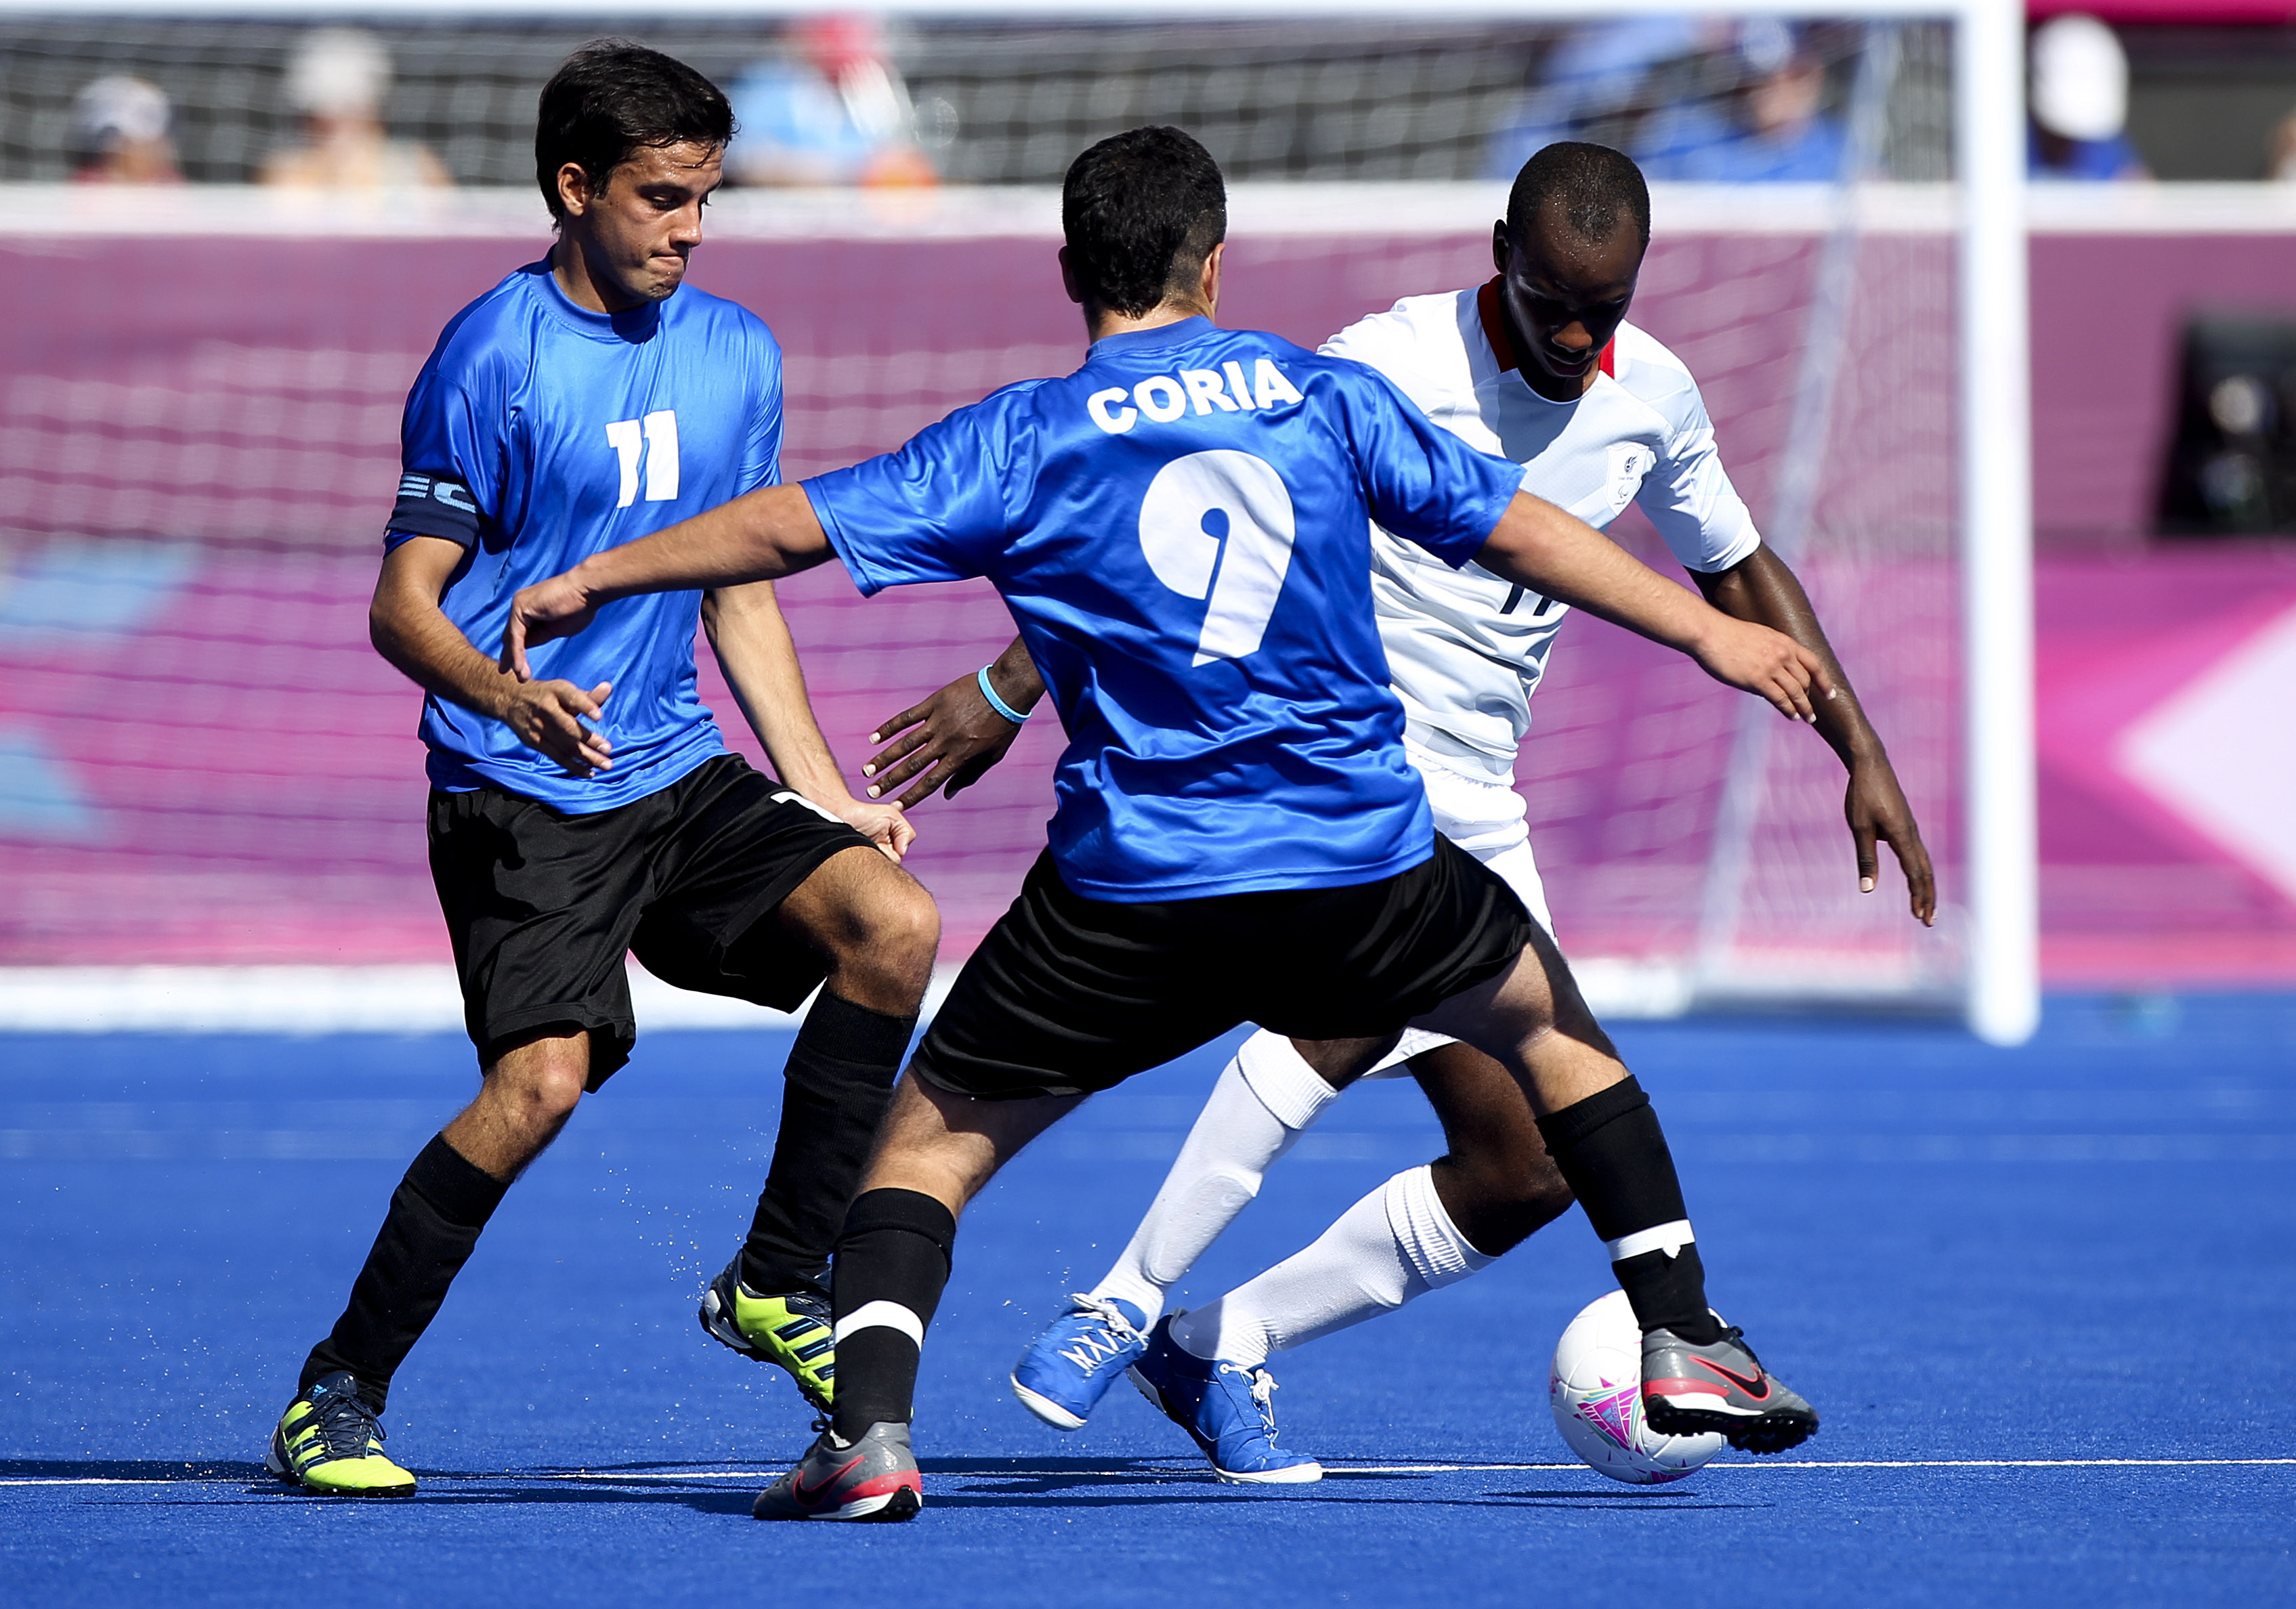 Argentina's football 7-a-side team plays against Great Britain at the London 2012 Paralympics